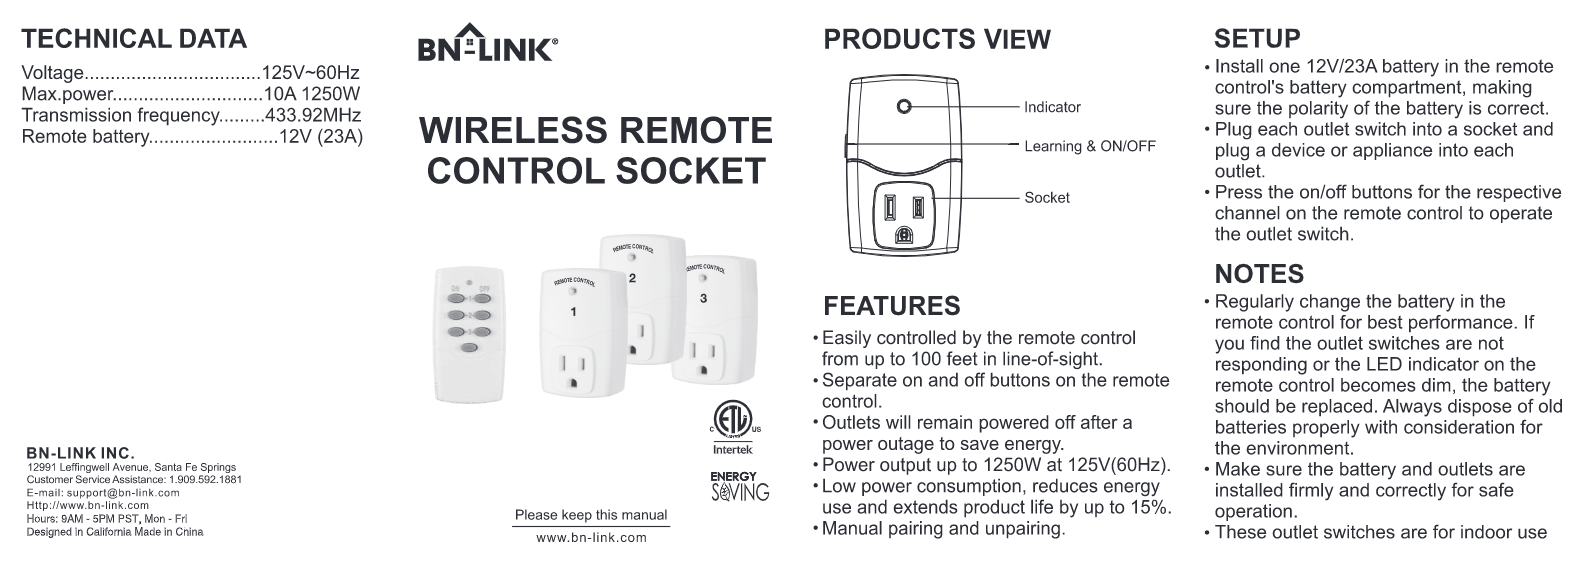 BN-LINK Wireless Remote Control Outlet (1 Remotes + 3 Outlets) Value Pack 